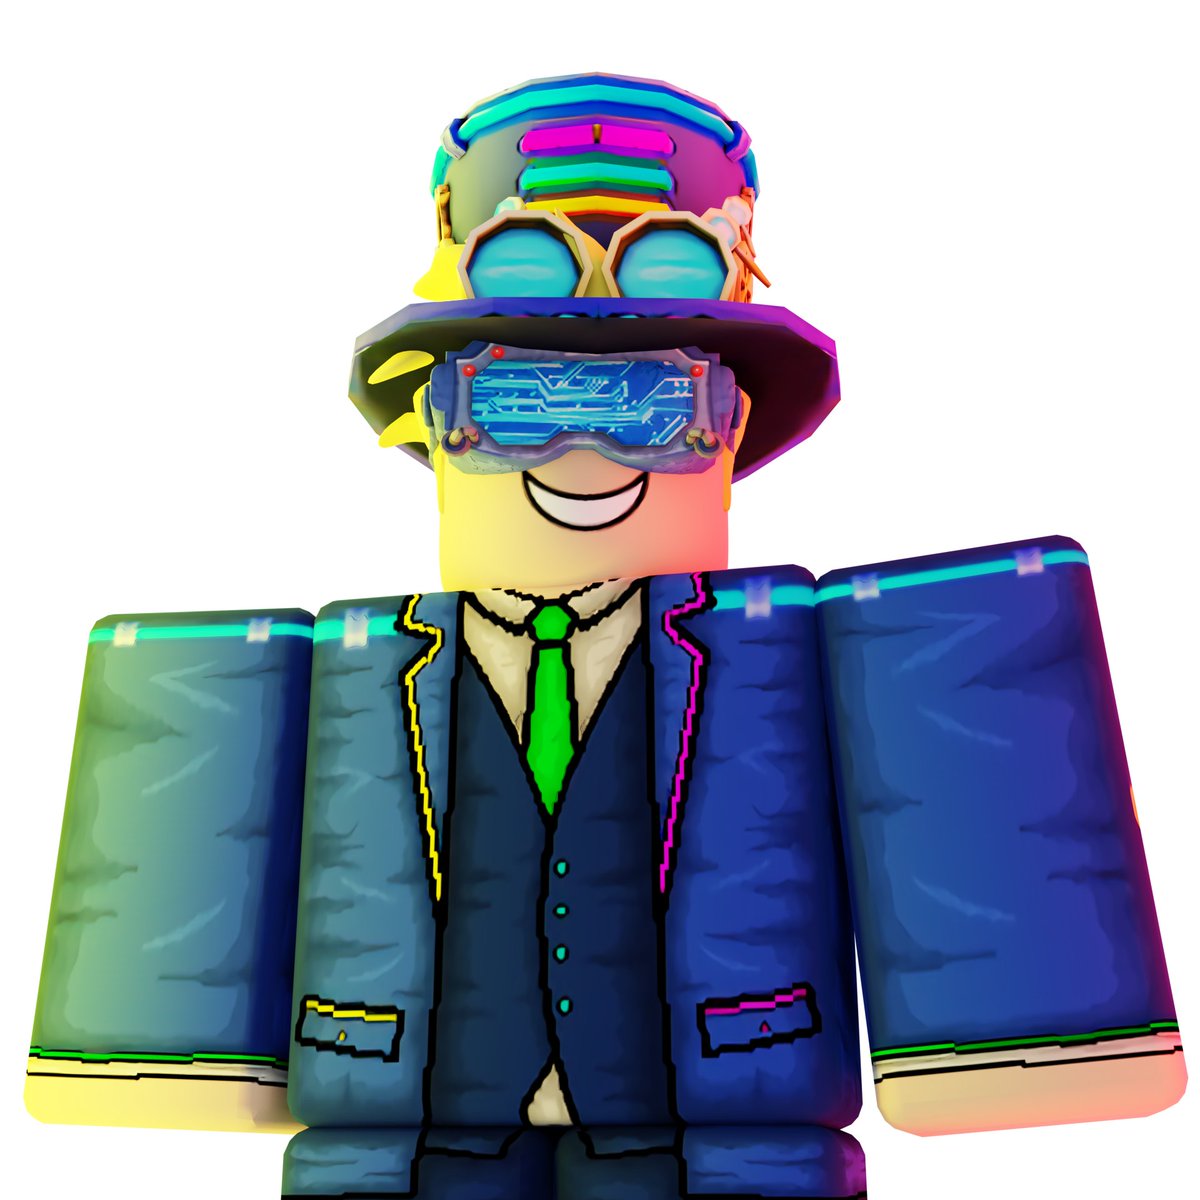 Funt Funtmaster Twitter - robloxmuff on twitter retweet and like and ill